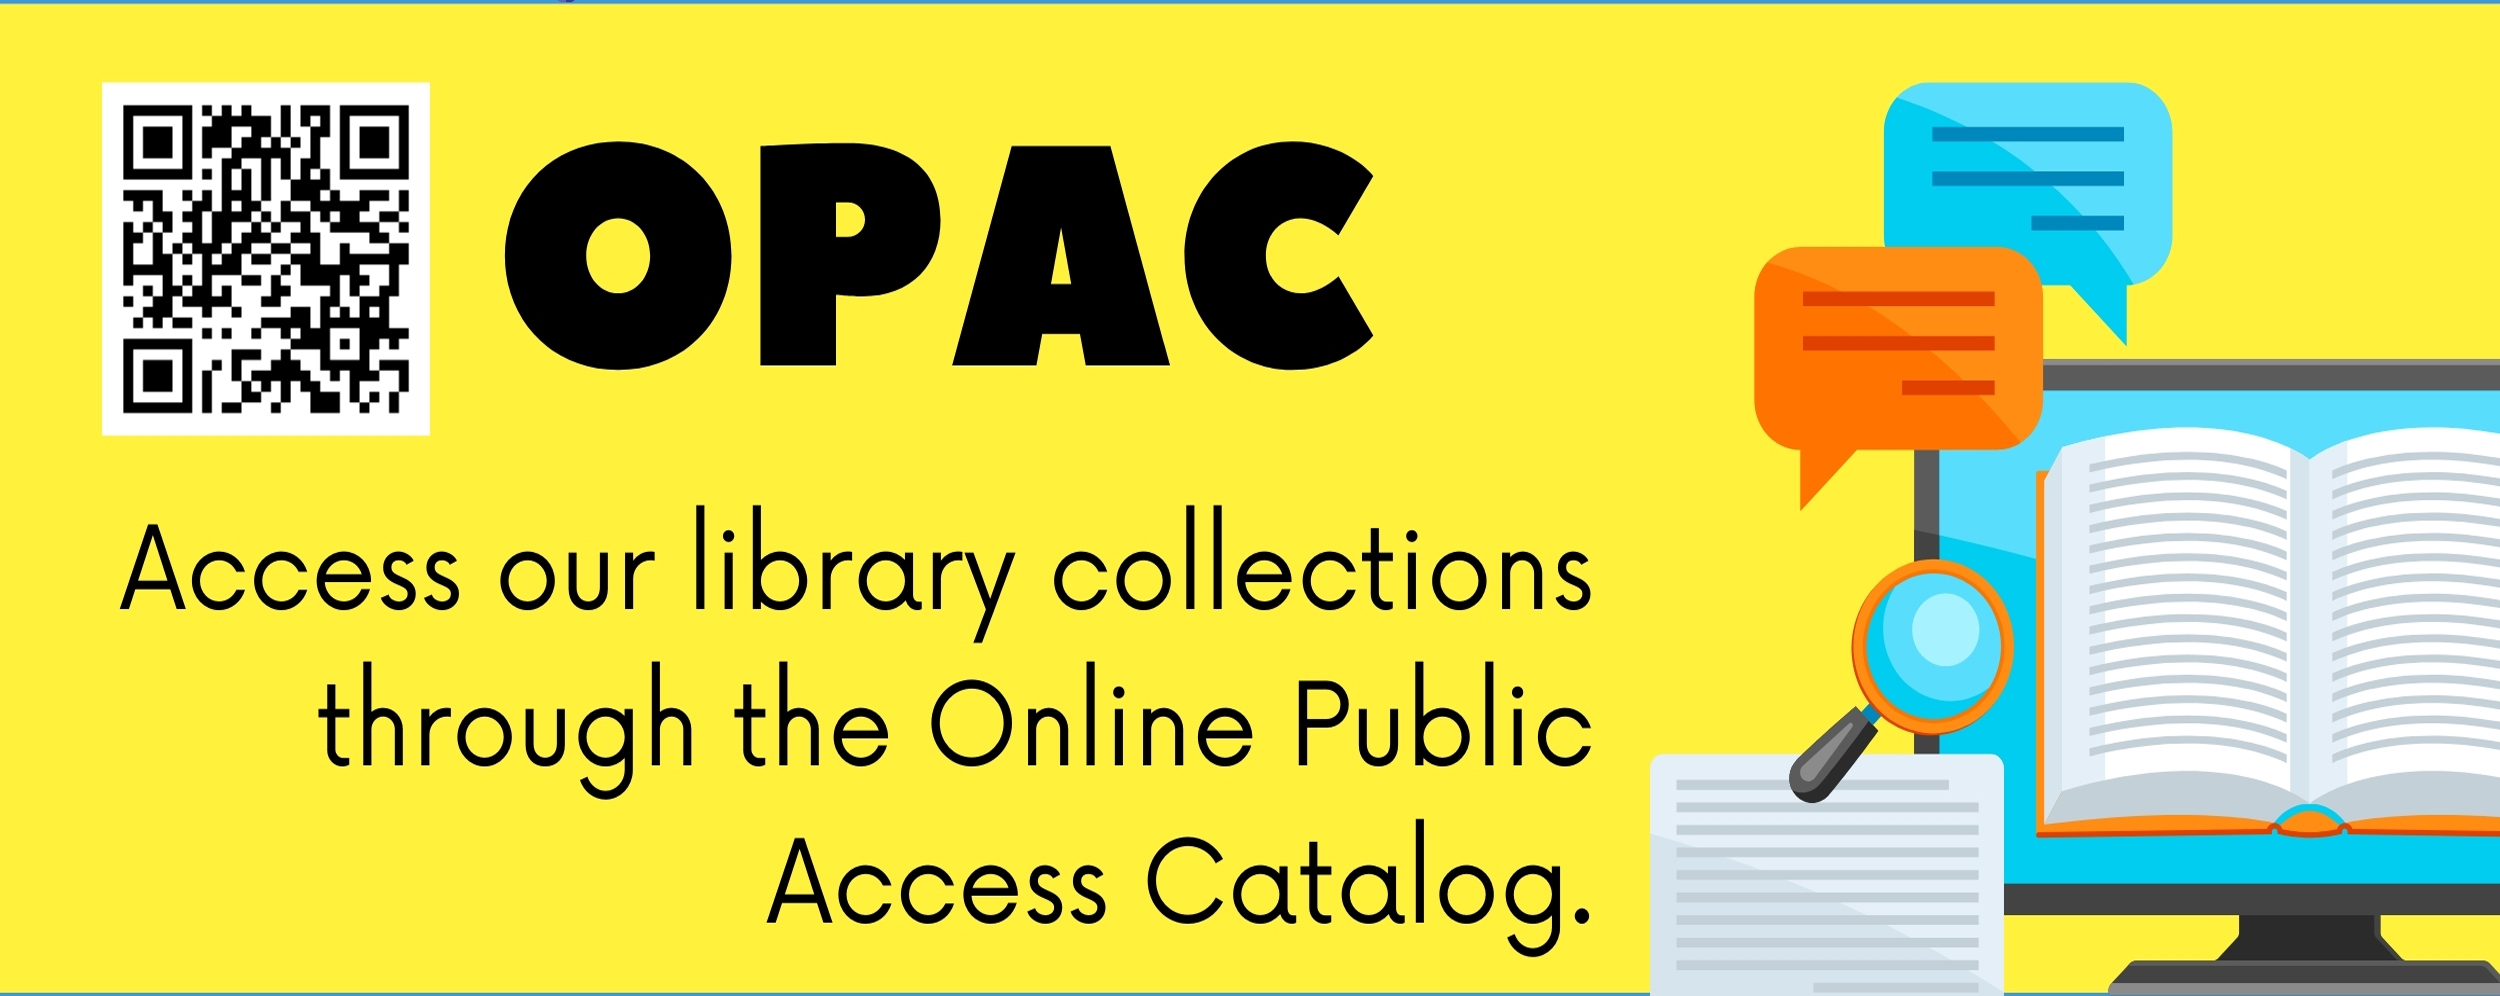 Access our library collections through the Online Public Access Catalog.